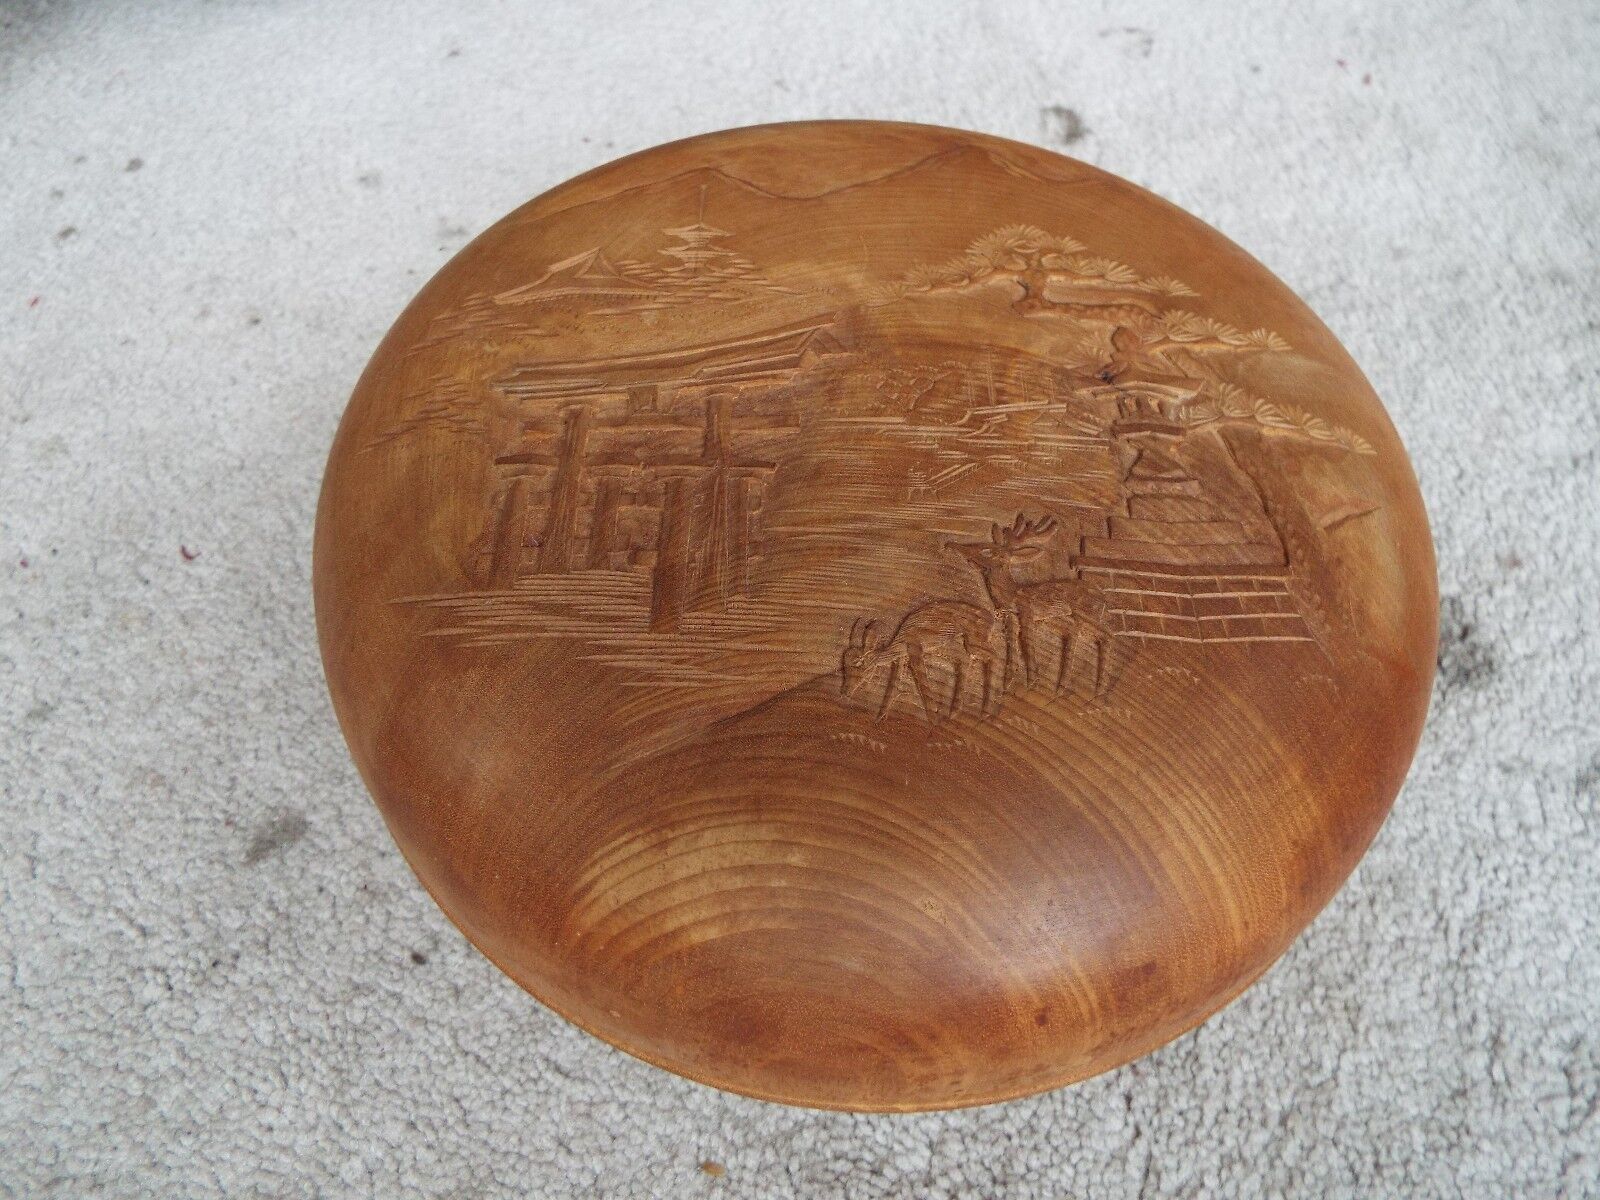 RARE ANTIQUE CHINESE CARVED TURNED WOOD WOODEN SCHOLAR BOX SIGNED NR